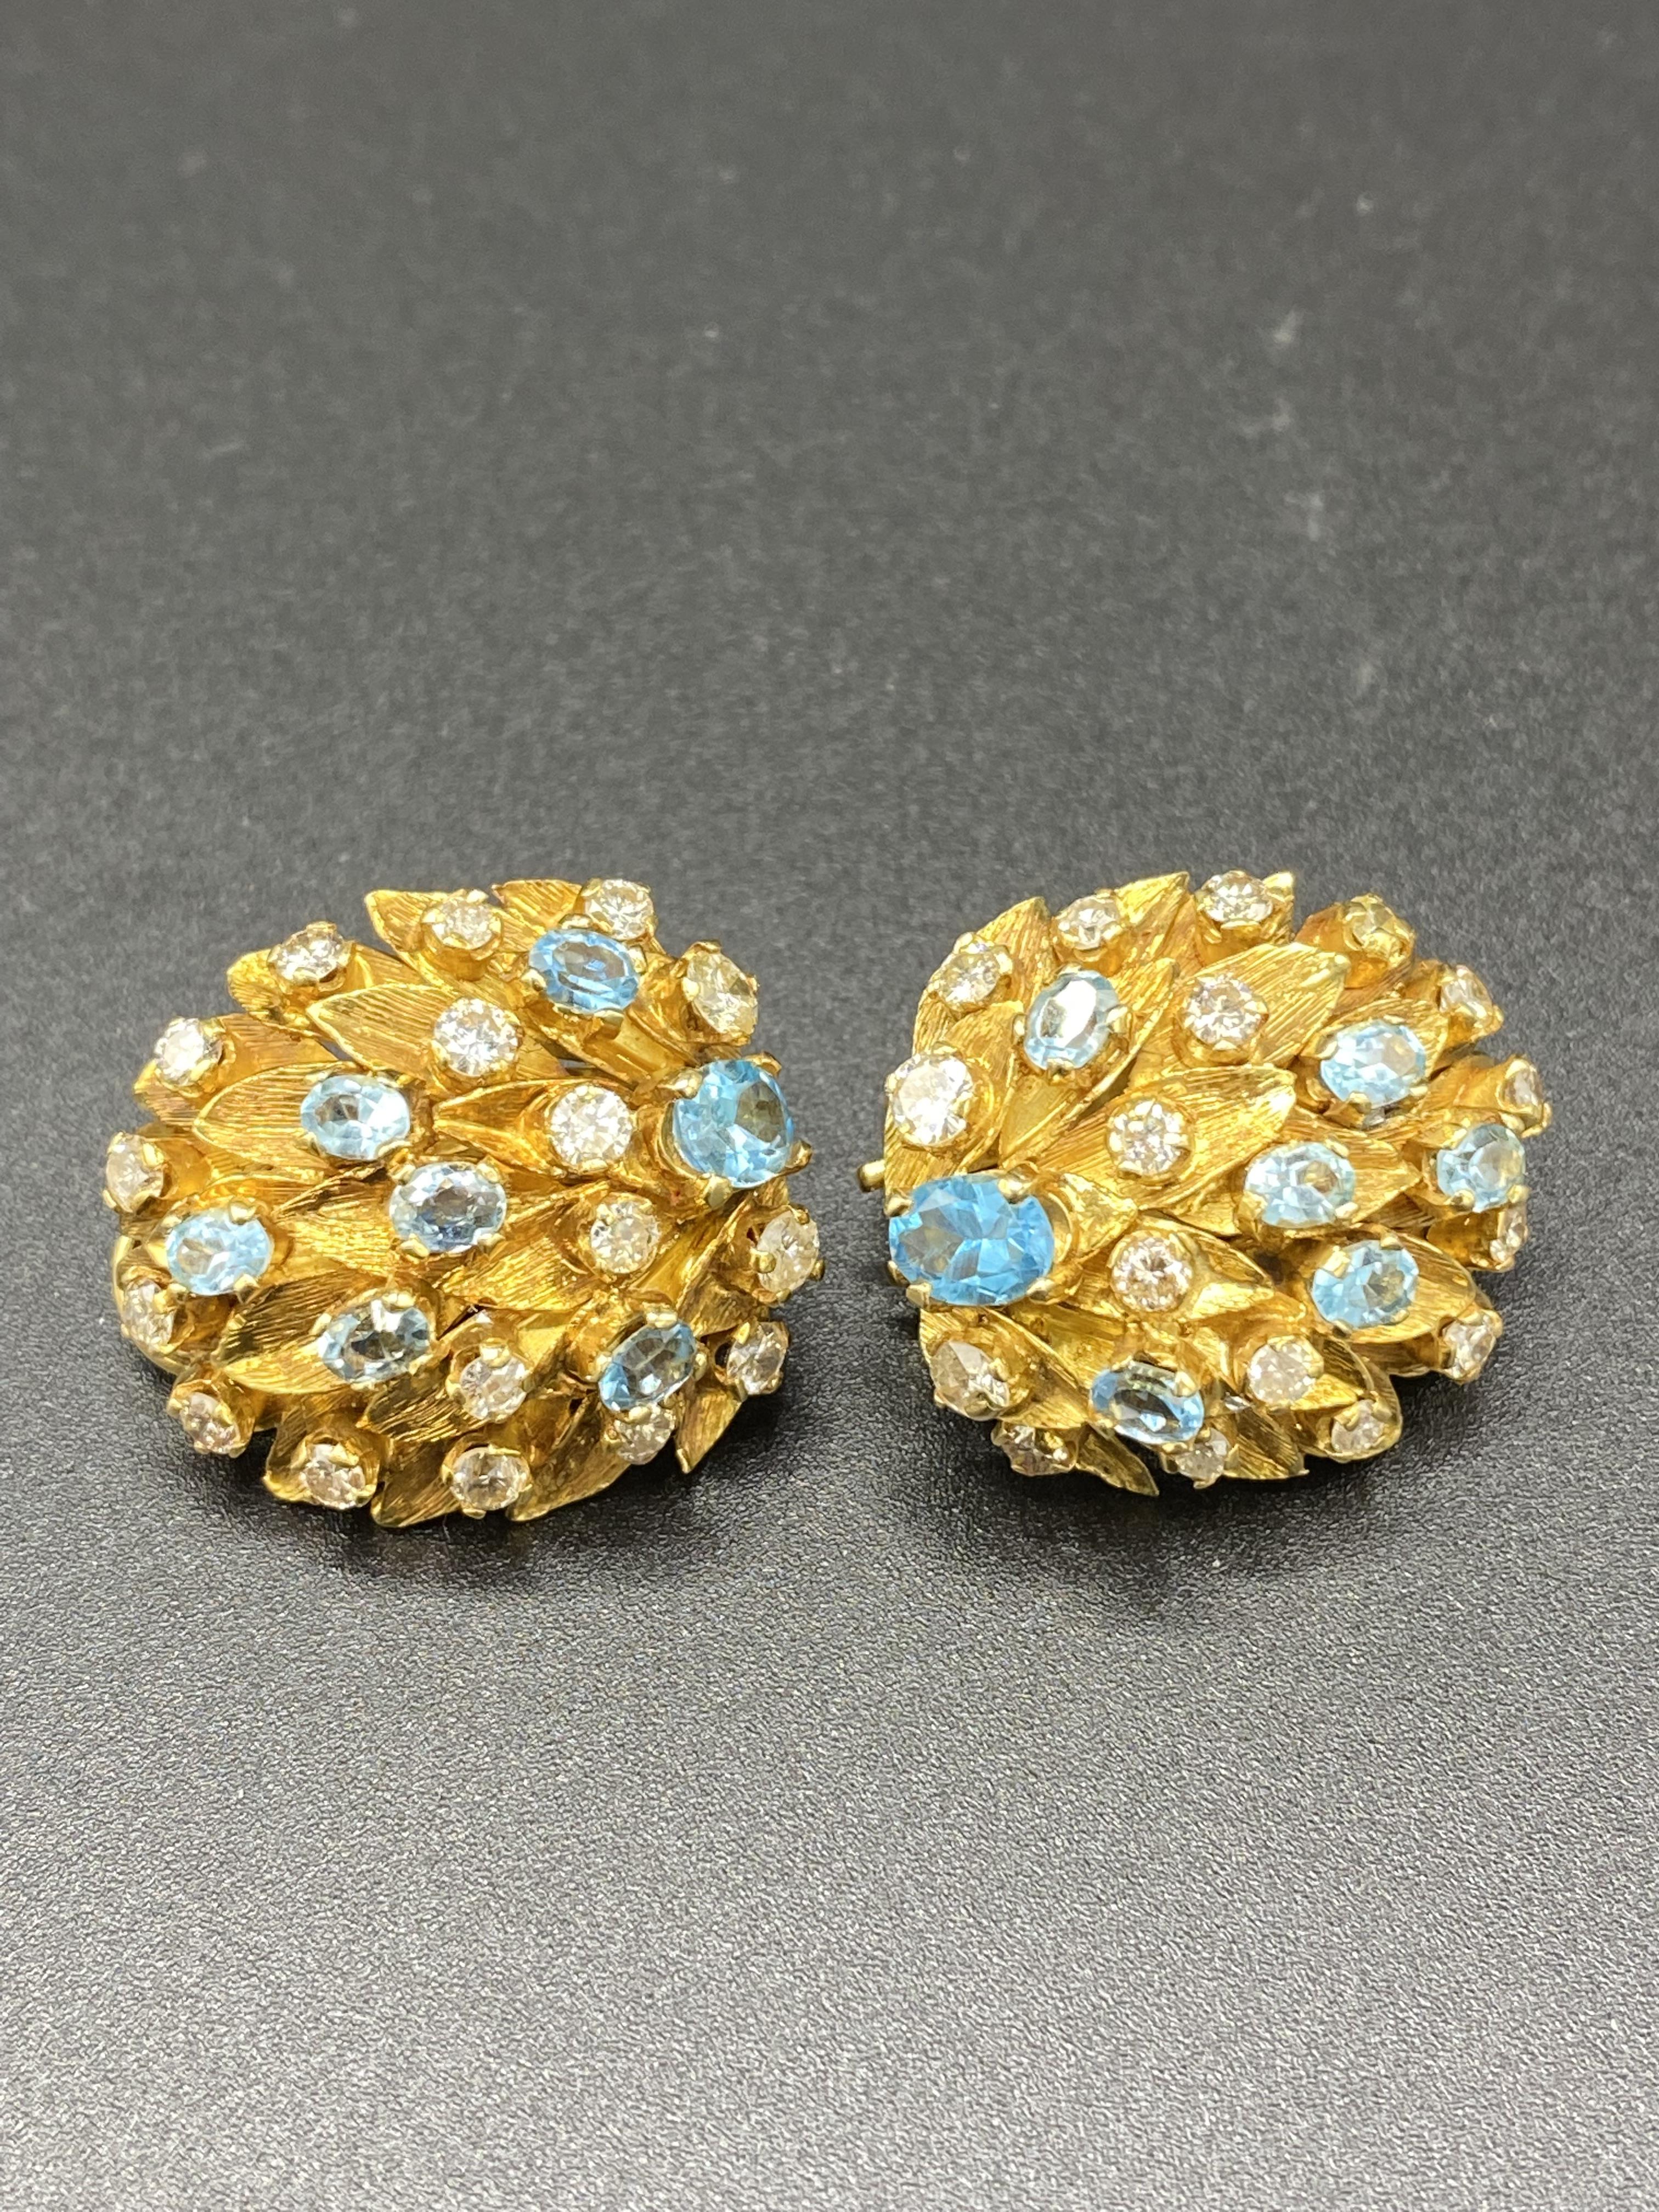 Pair of yellow metal earring set with diamonds and aquamarines, together with costume jewellery - Image 4 of 6